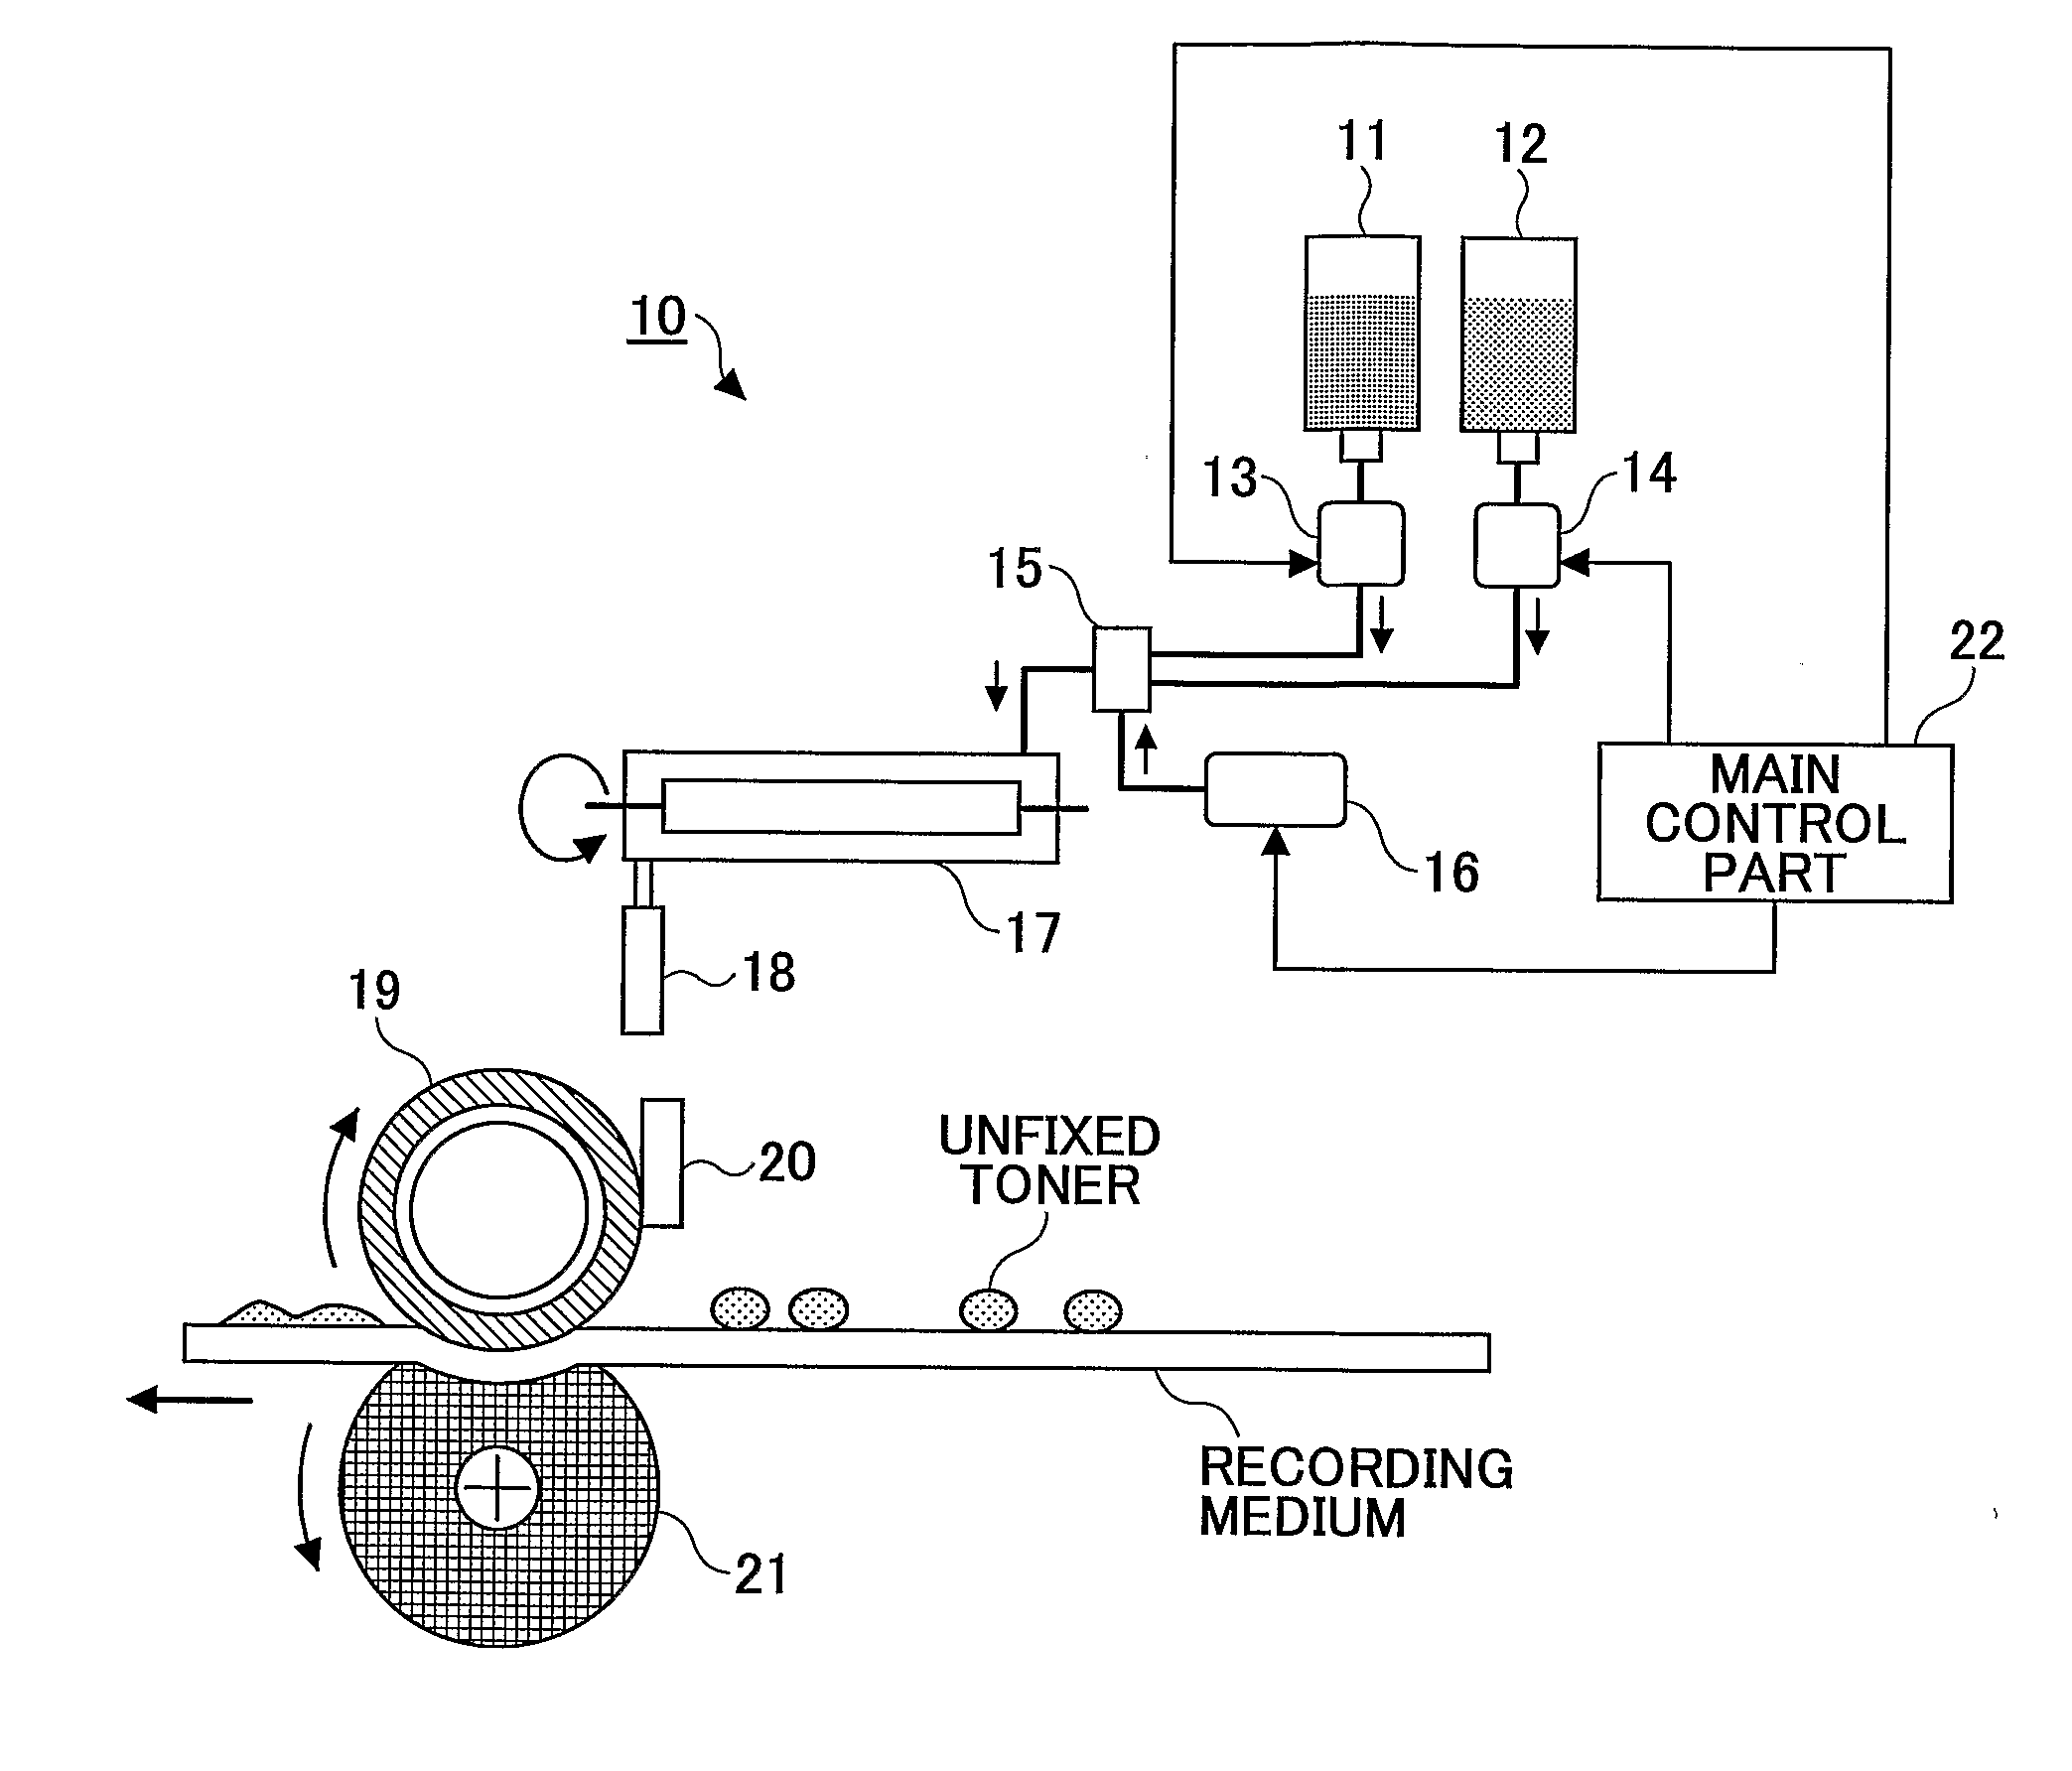 Fixation device, image forming apparatus, and fixation fluid storage container